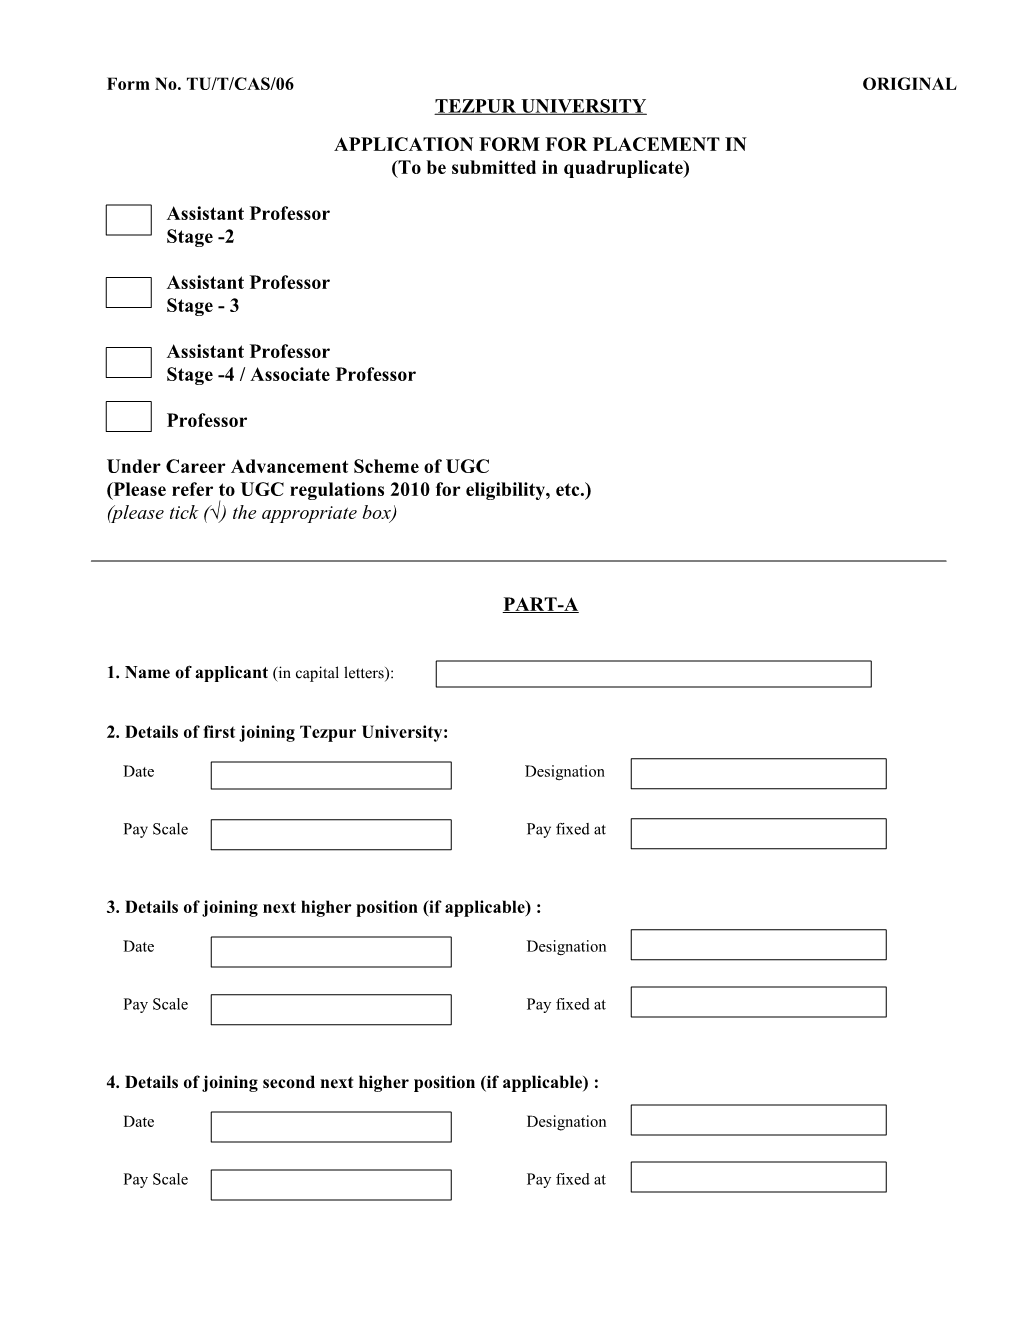 Application Form for Placement In